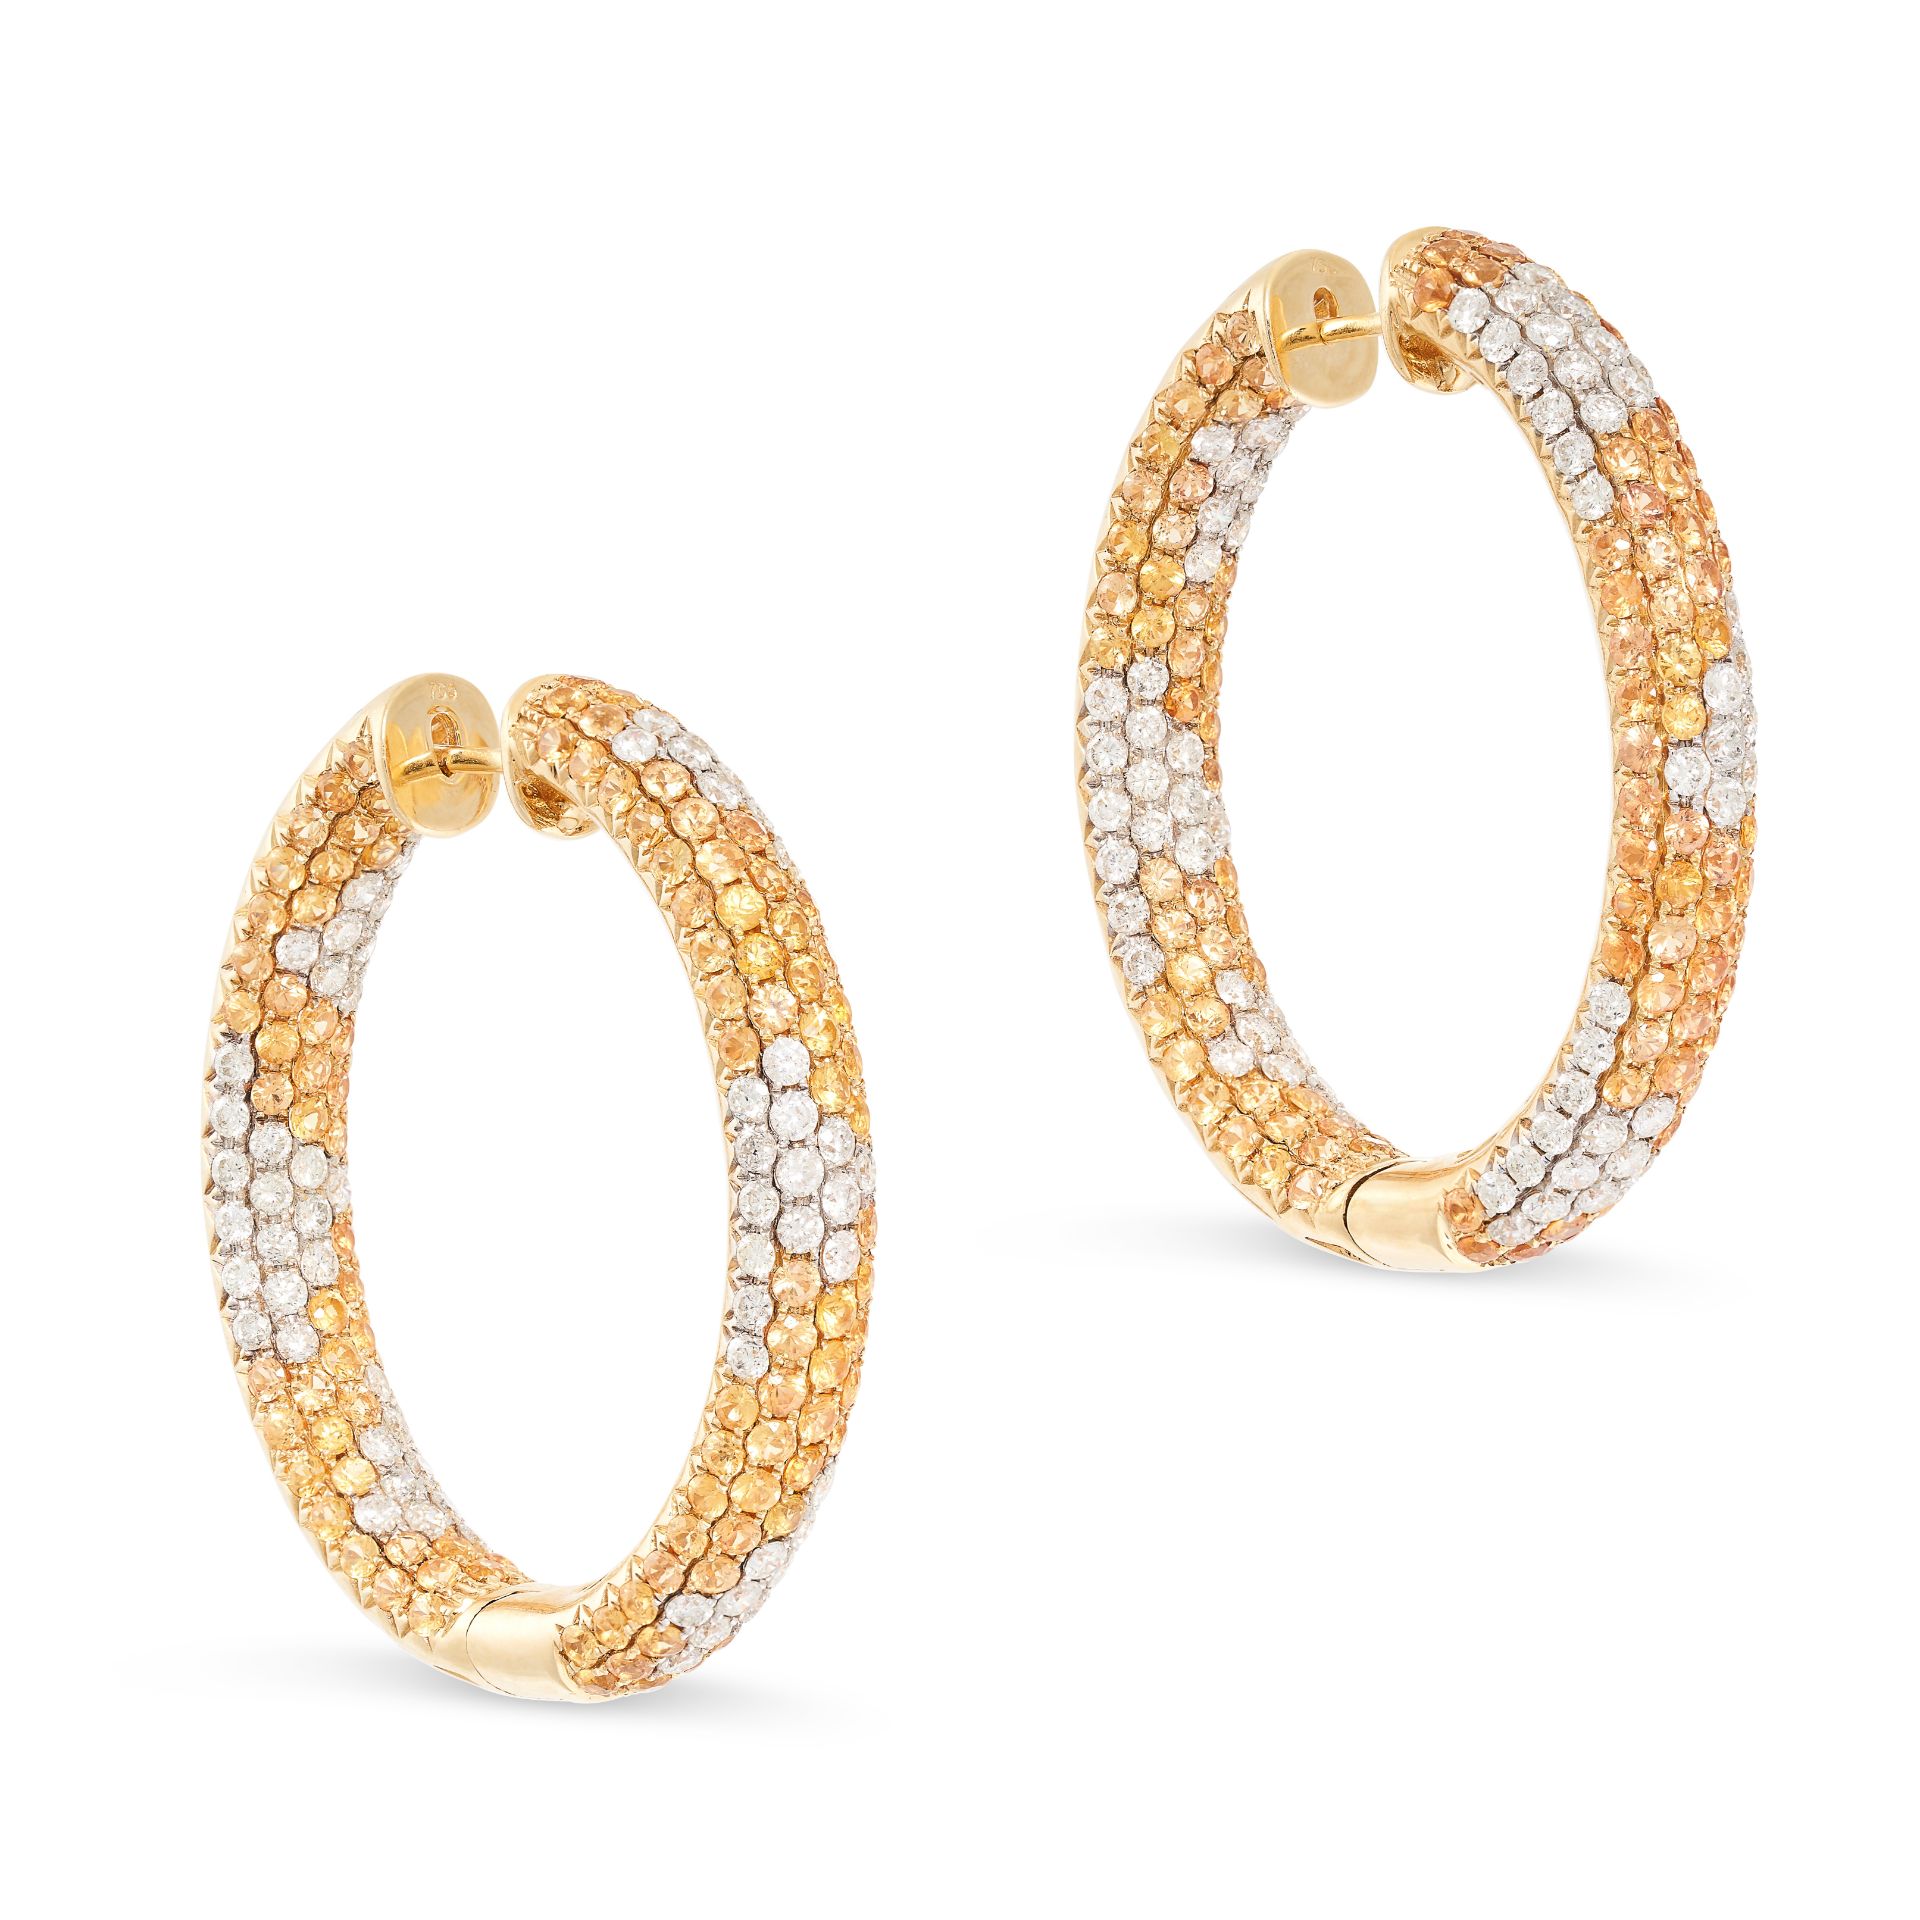 A PAIR OF YELLOW SAPPHIRE AND DIAMOND HOOP EARRINGS pave set with alternating round cut yellow